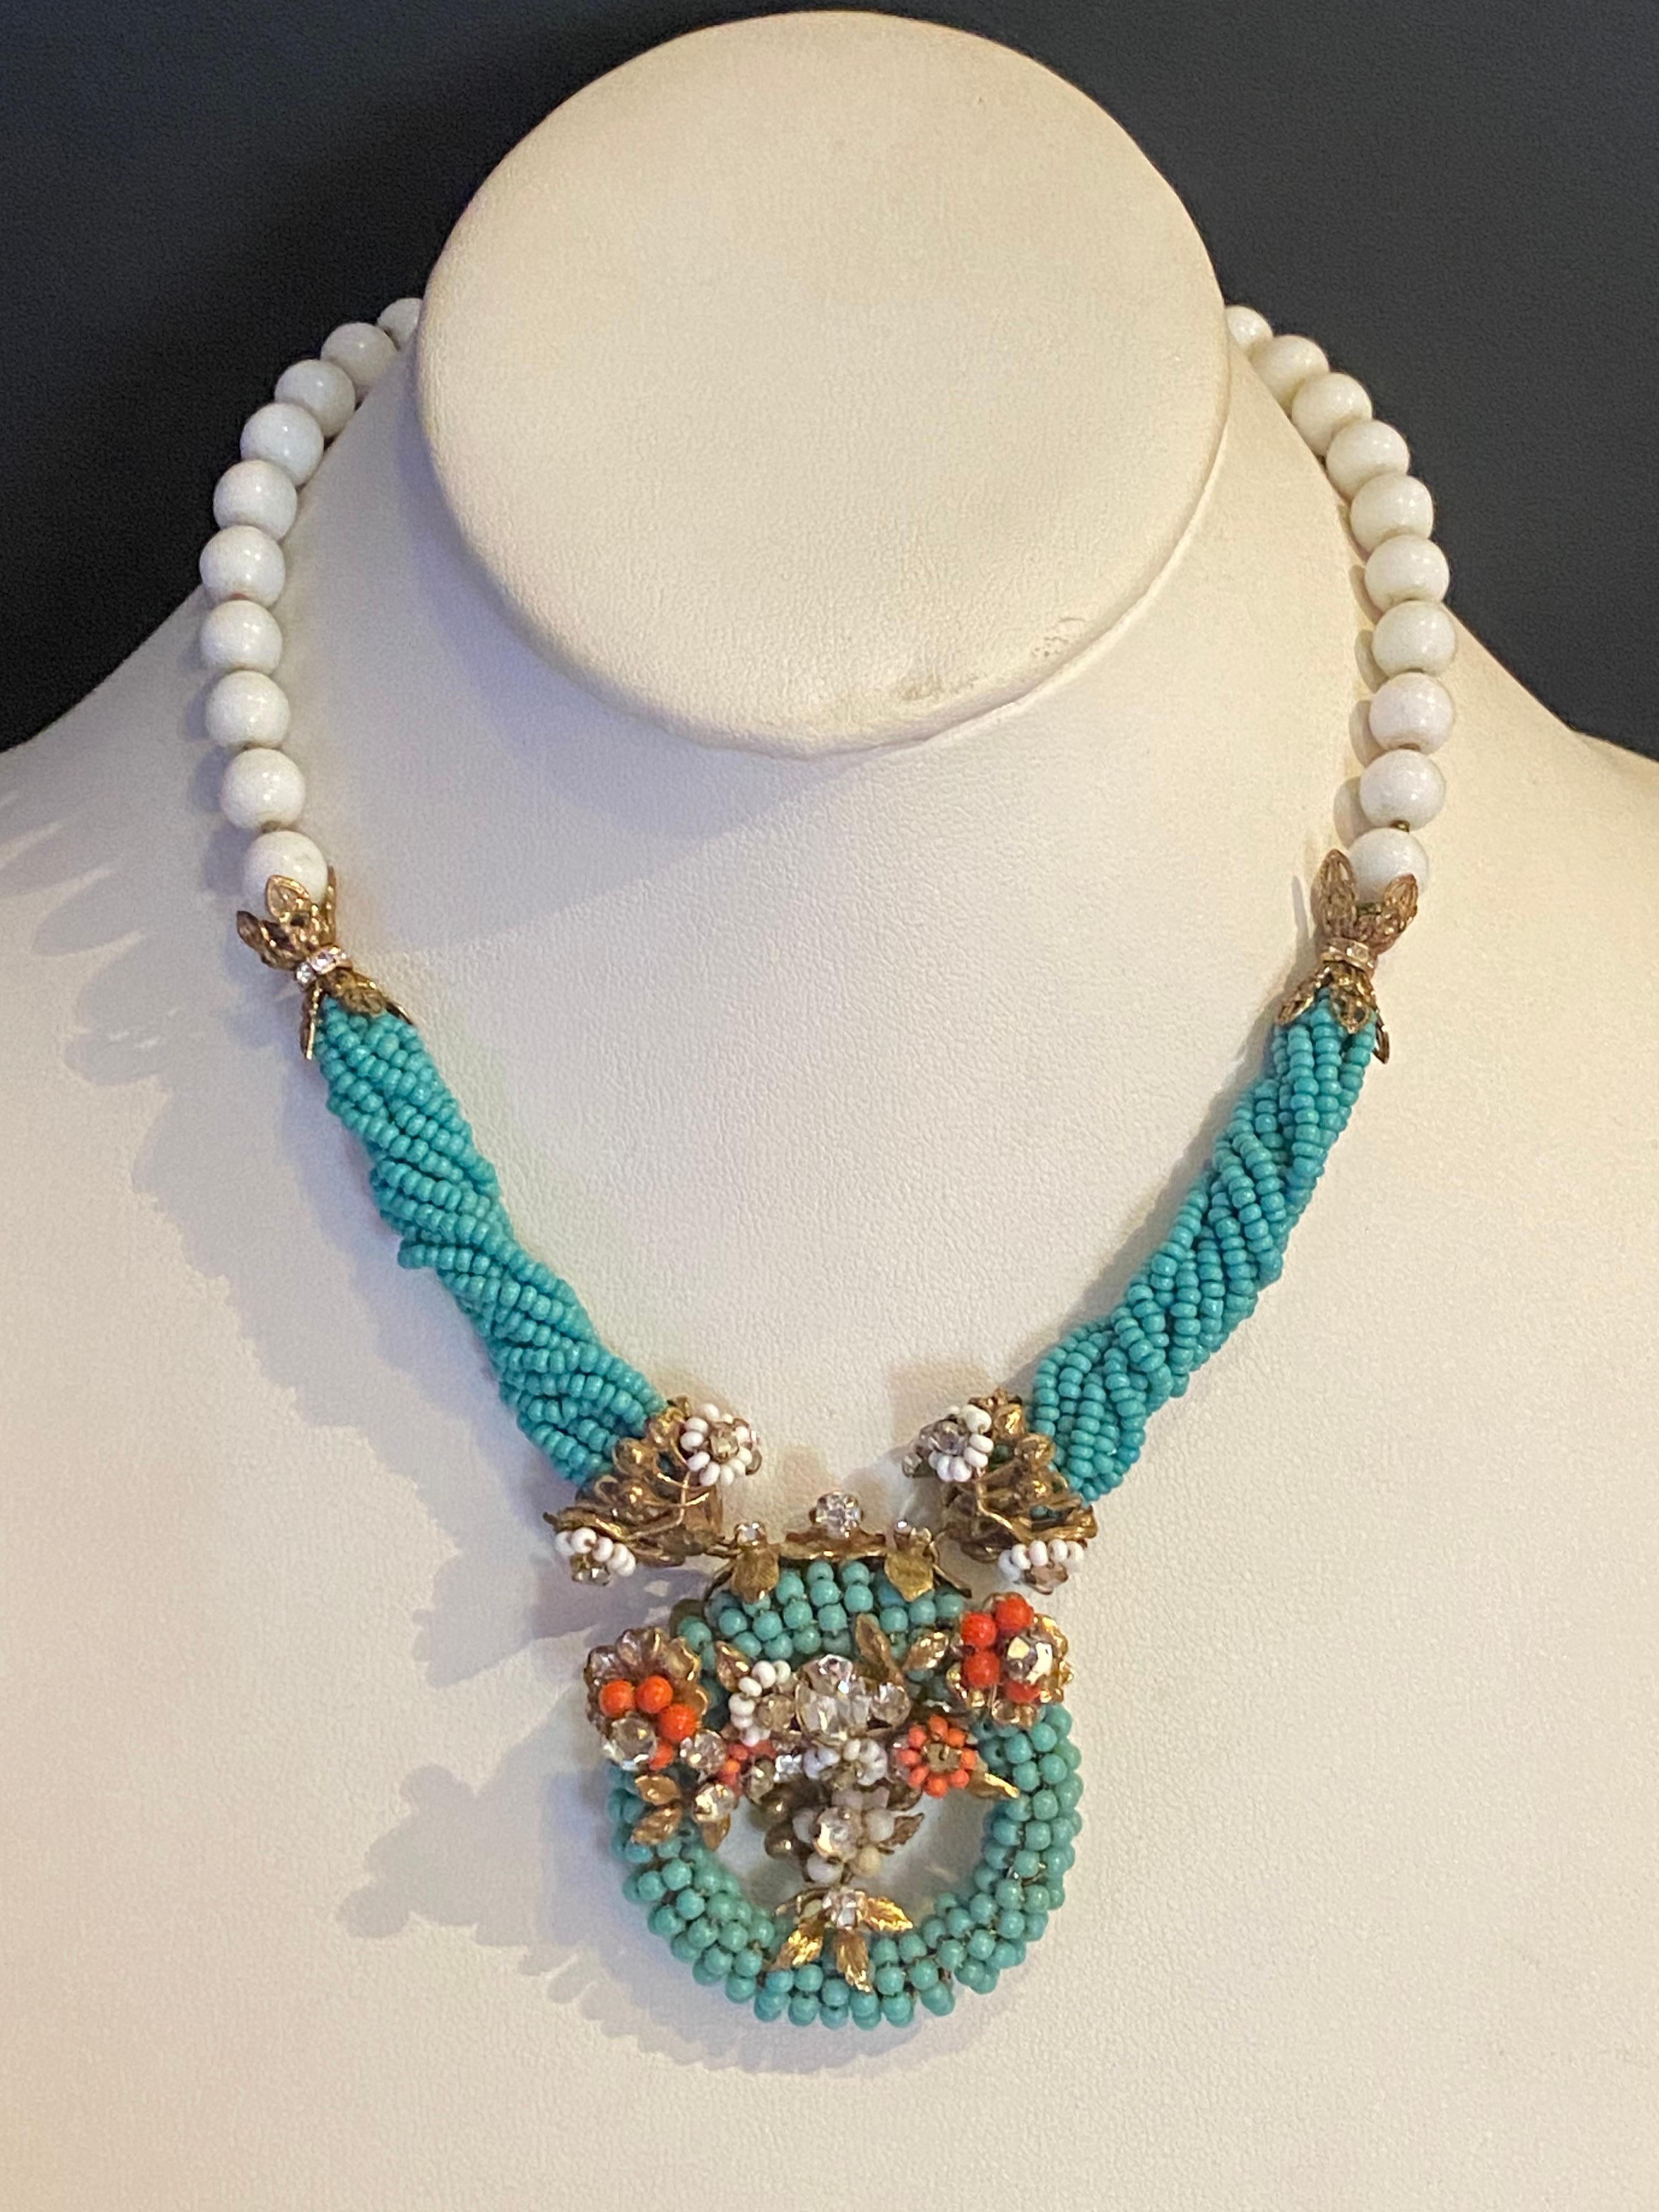 This beautiful hand made set features a stunning combination of turquoise, coral, and white glass seed beads. The necklace is designed with wrapped and twisted stands of turquoise glass seed beads, large  white glass beads, accents of coral glass